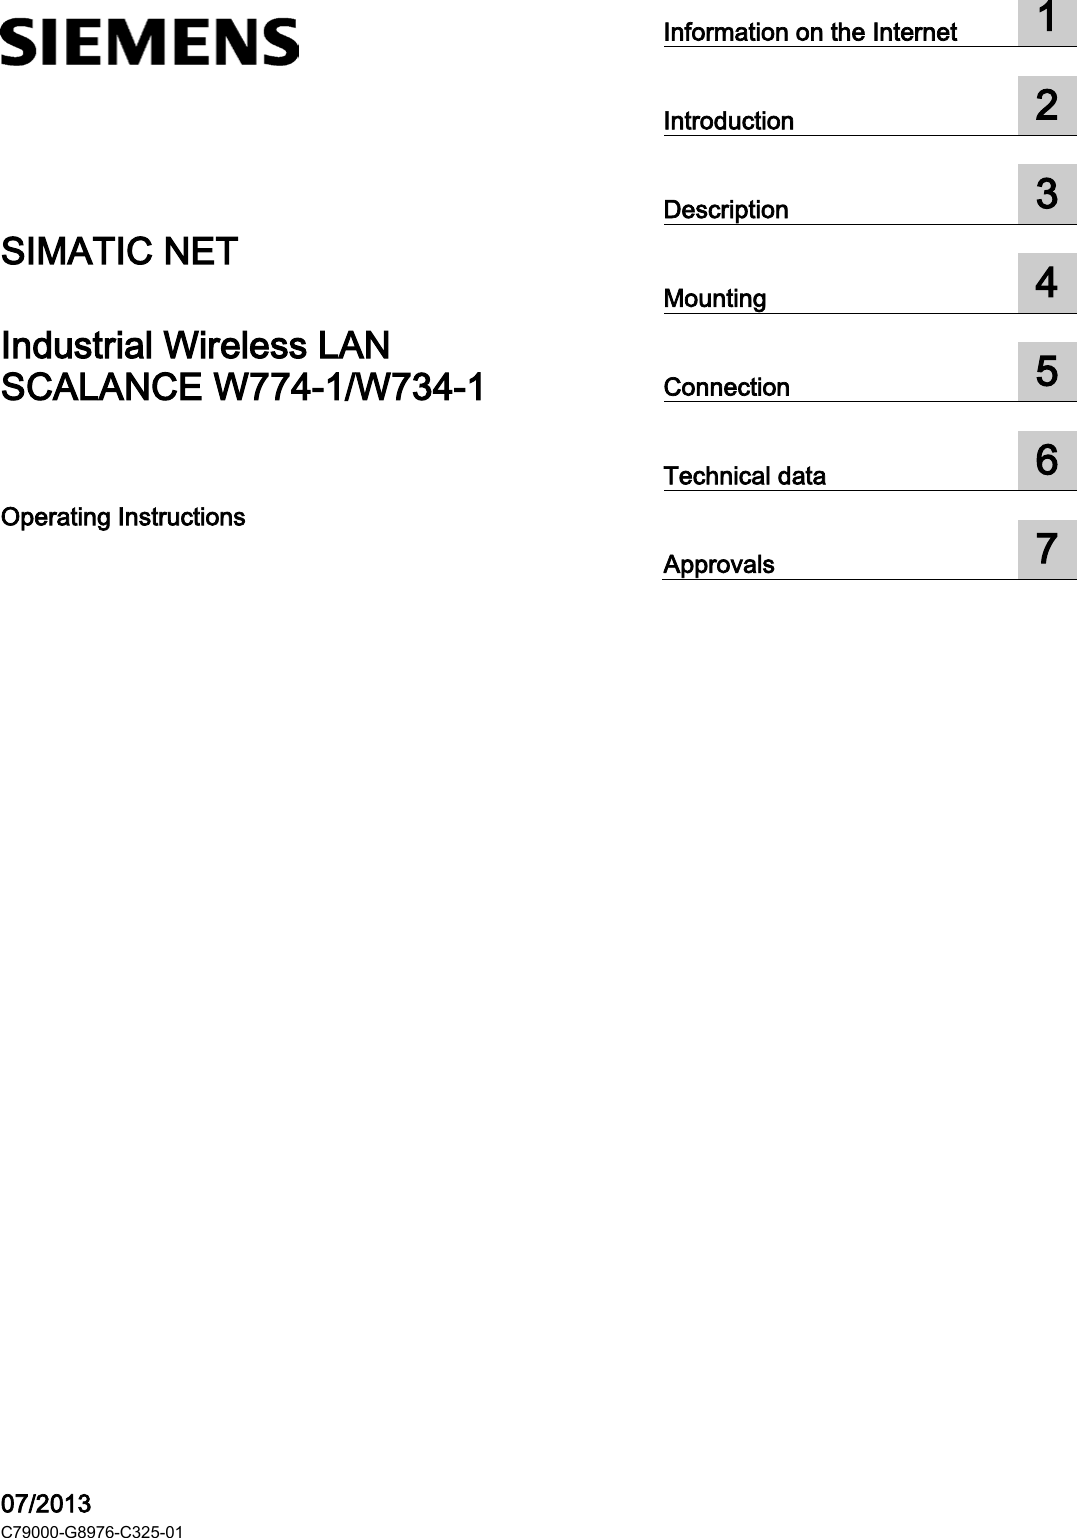 SCALANCE W774-1/W734-1  ___________________ ___________________ ___________________ ___________________ ___________________ ___________________   SIMATIC NET Industrial Wireless LAN SCALANCE W774-1/W734-1 Operating Instructions    07/2013 C79000-G8976-C325-01 Information on the Internet  1  Introduction  2  Description  3  Mounting  4  Connection  5  Technical data  6  Approvals  7 